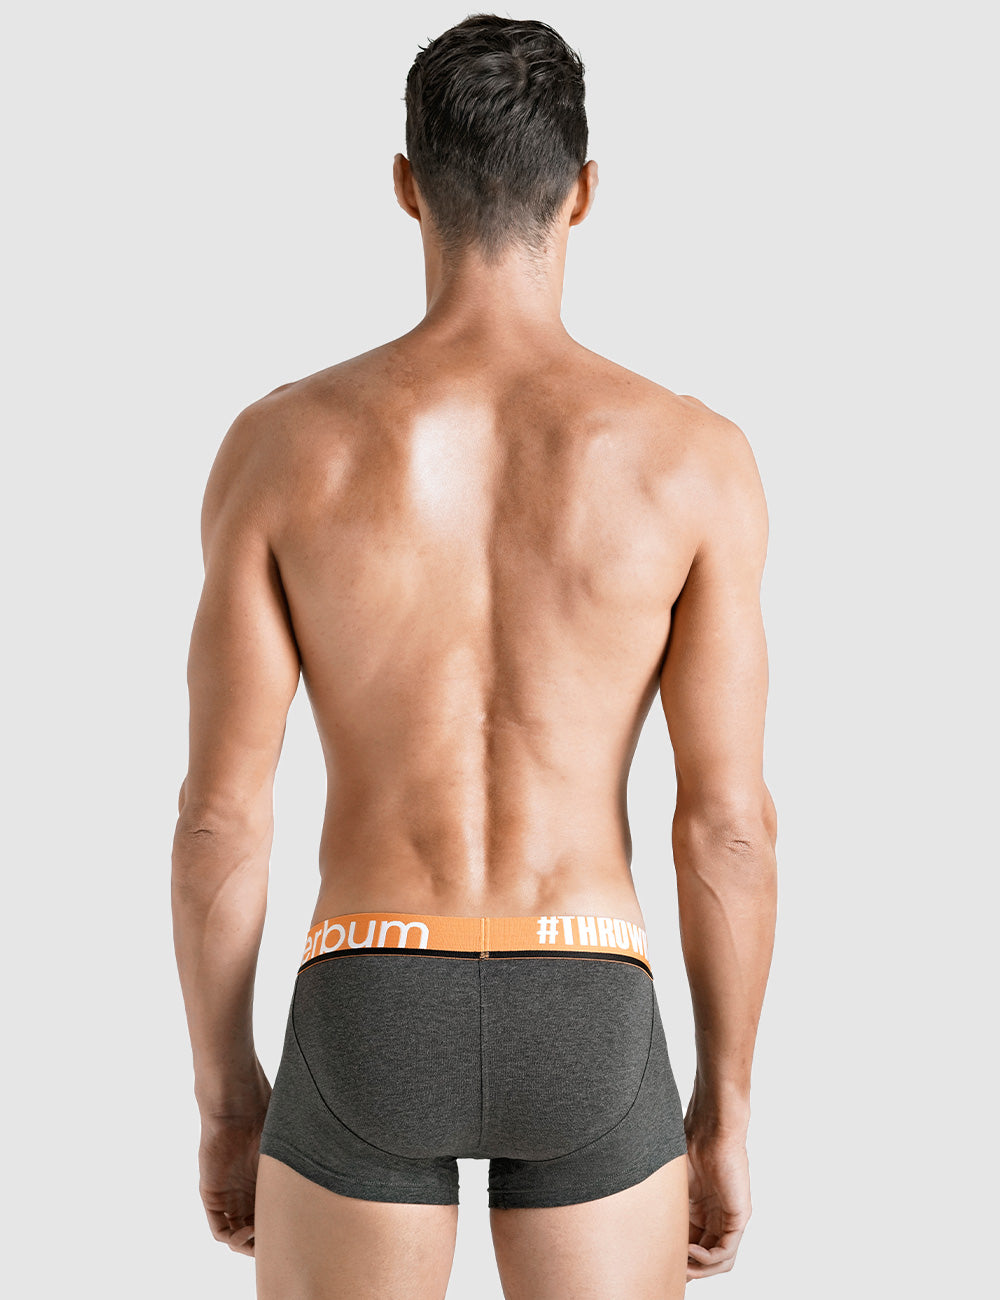 New Lift Trunk 5pack